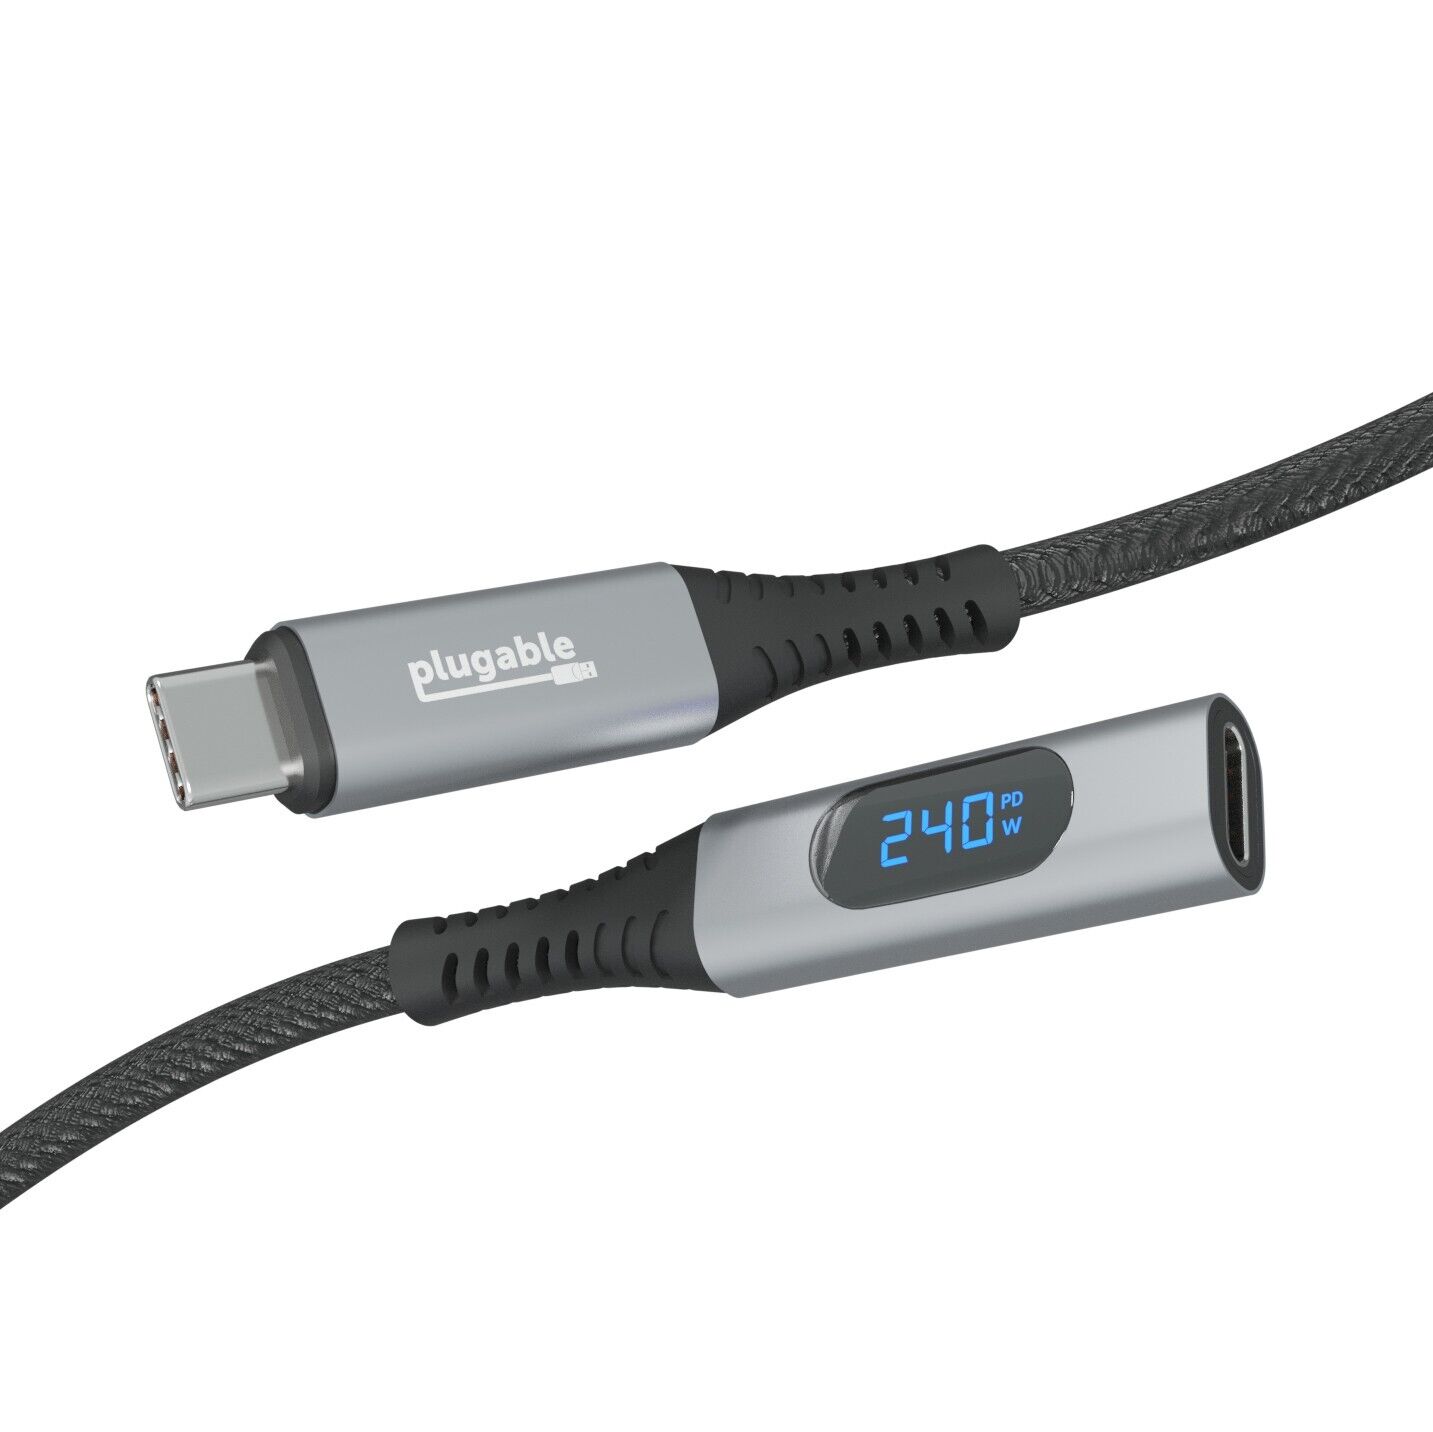 Plugable USB C Extension Cable with Power Meter, 240W, 3.3 ft